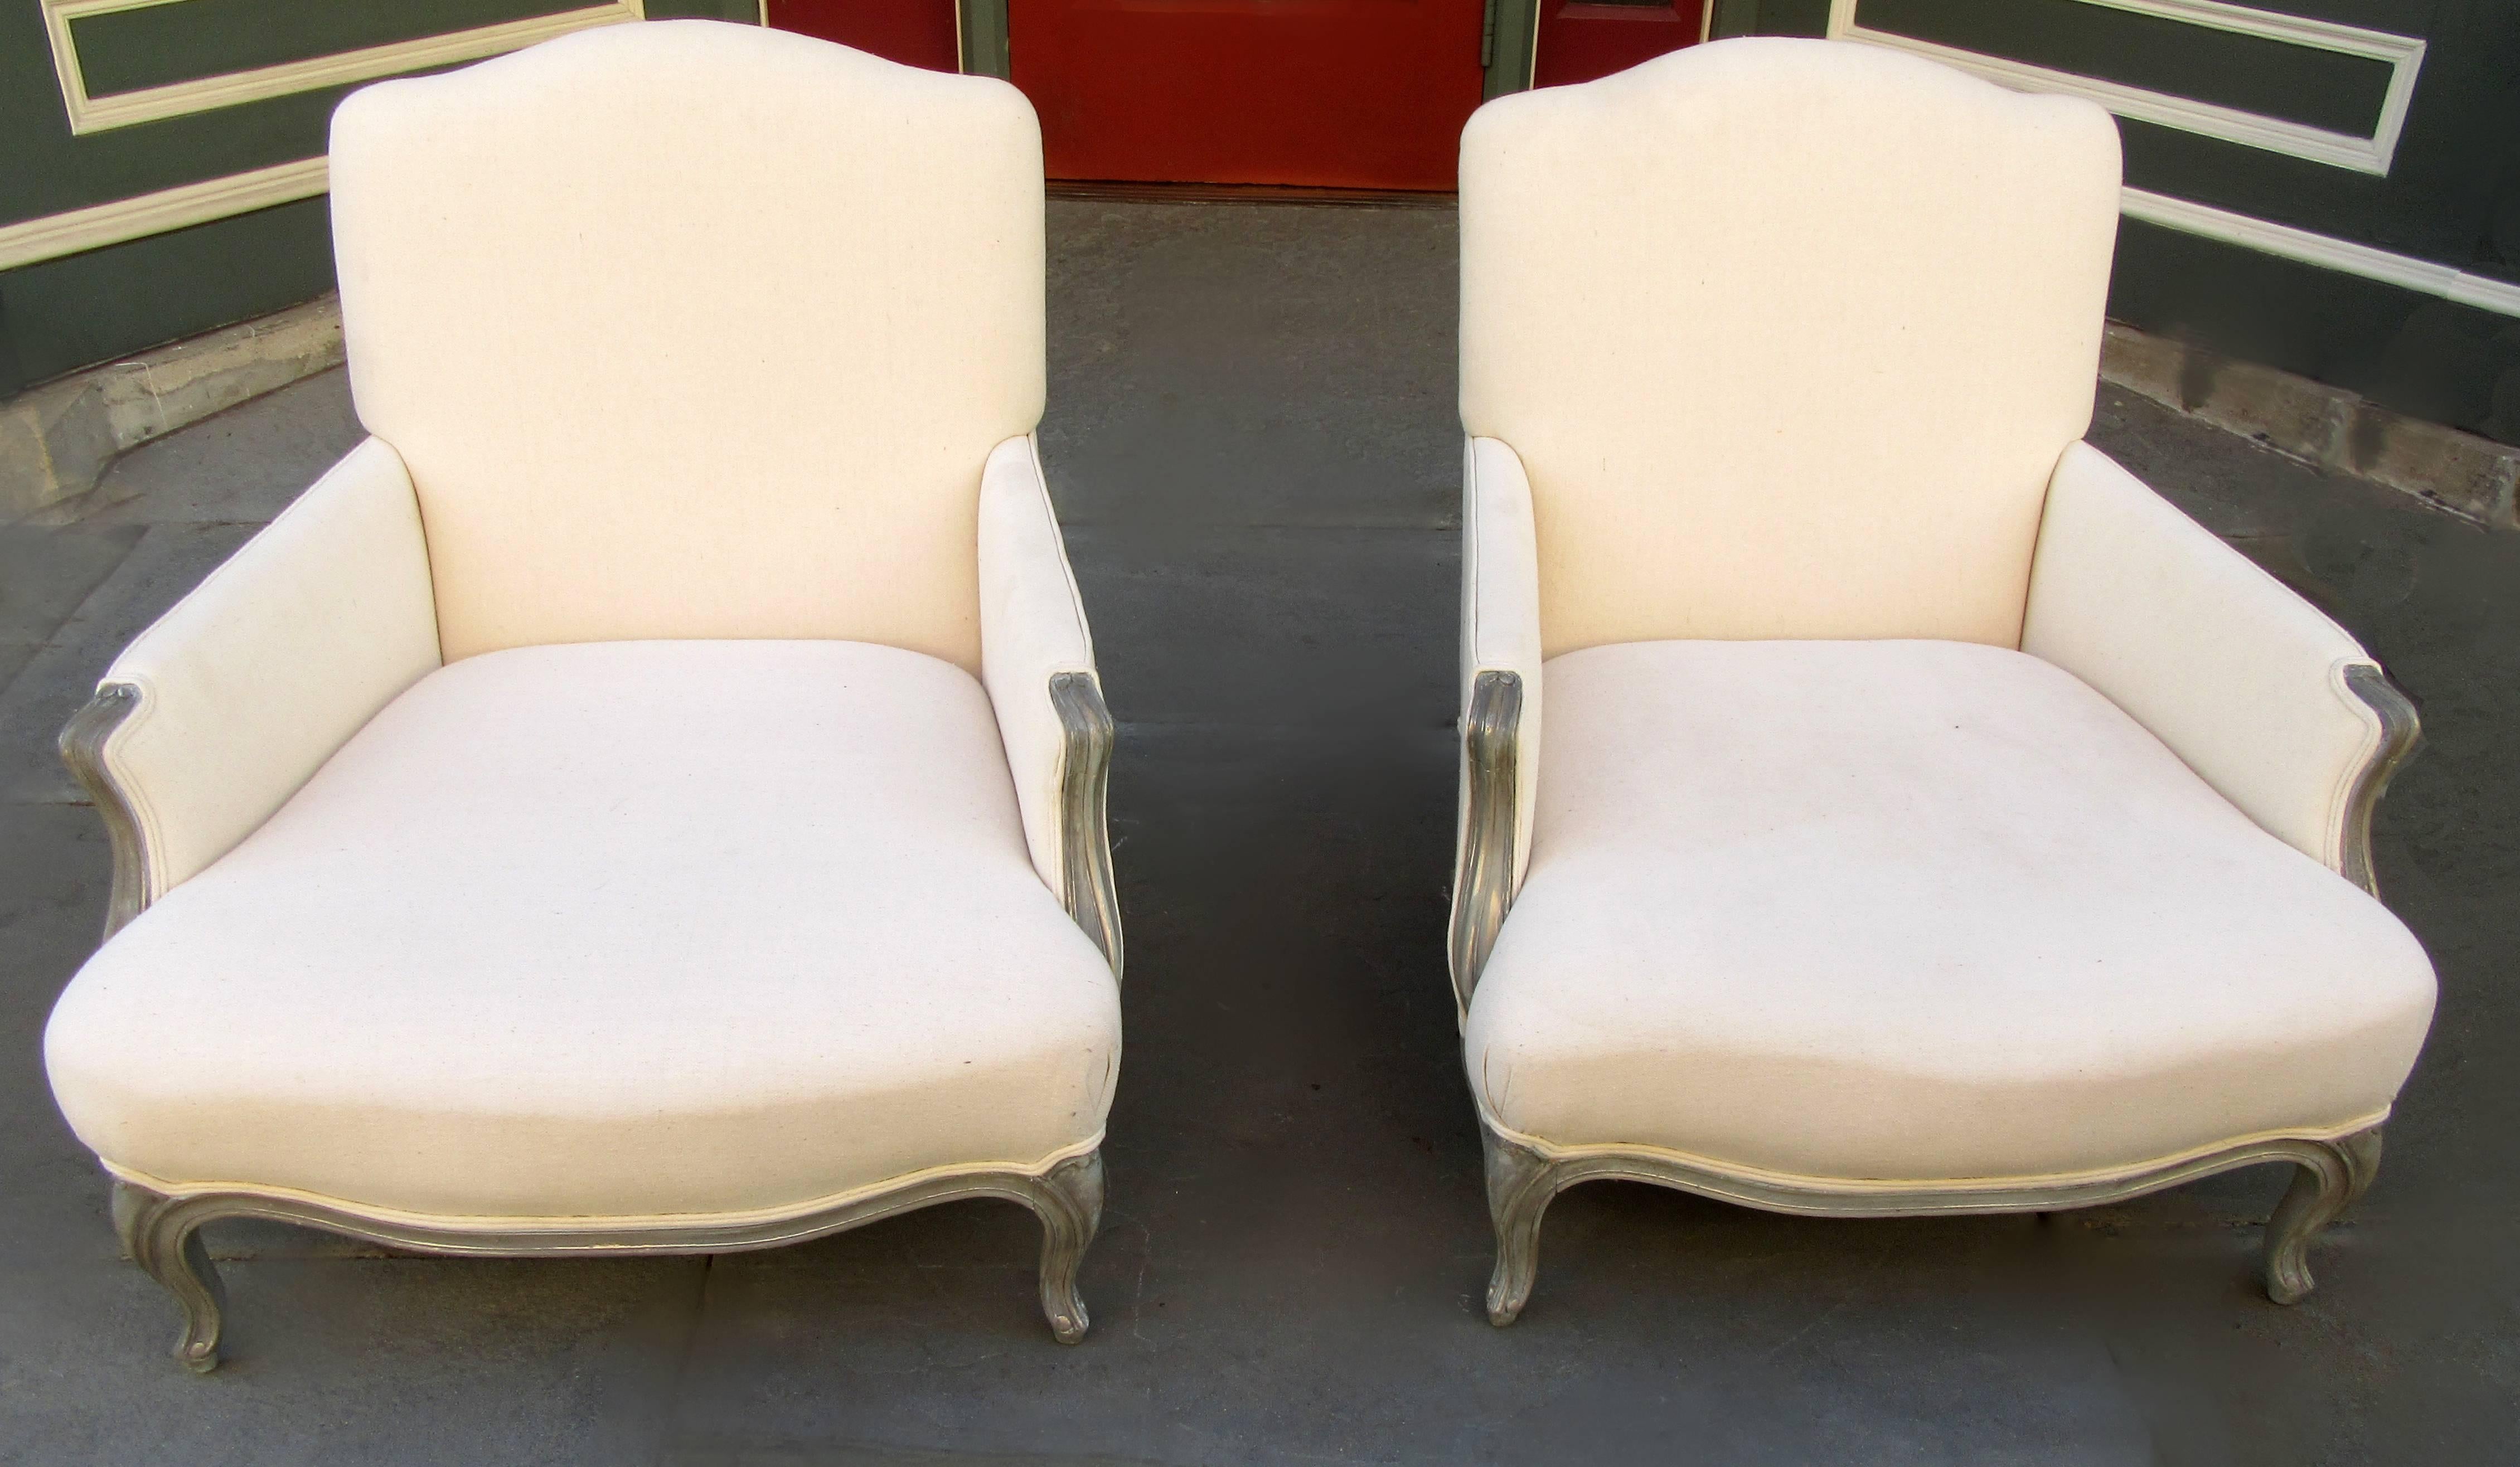 A pair of larger-scale French chairs in the Louis XV style, painted and newly upholstered in white cotton duck, circa 1900.